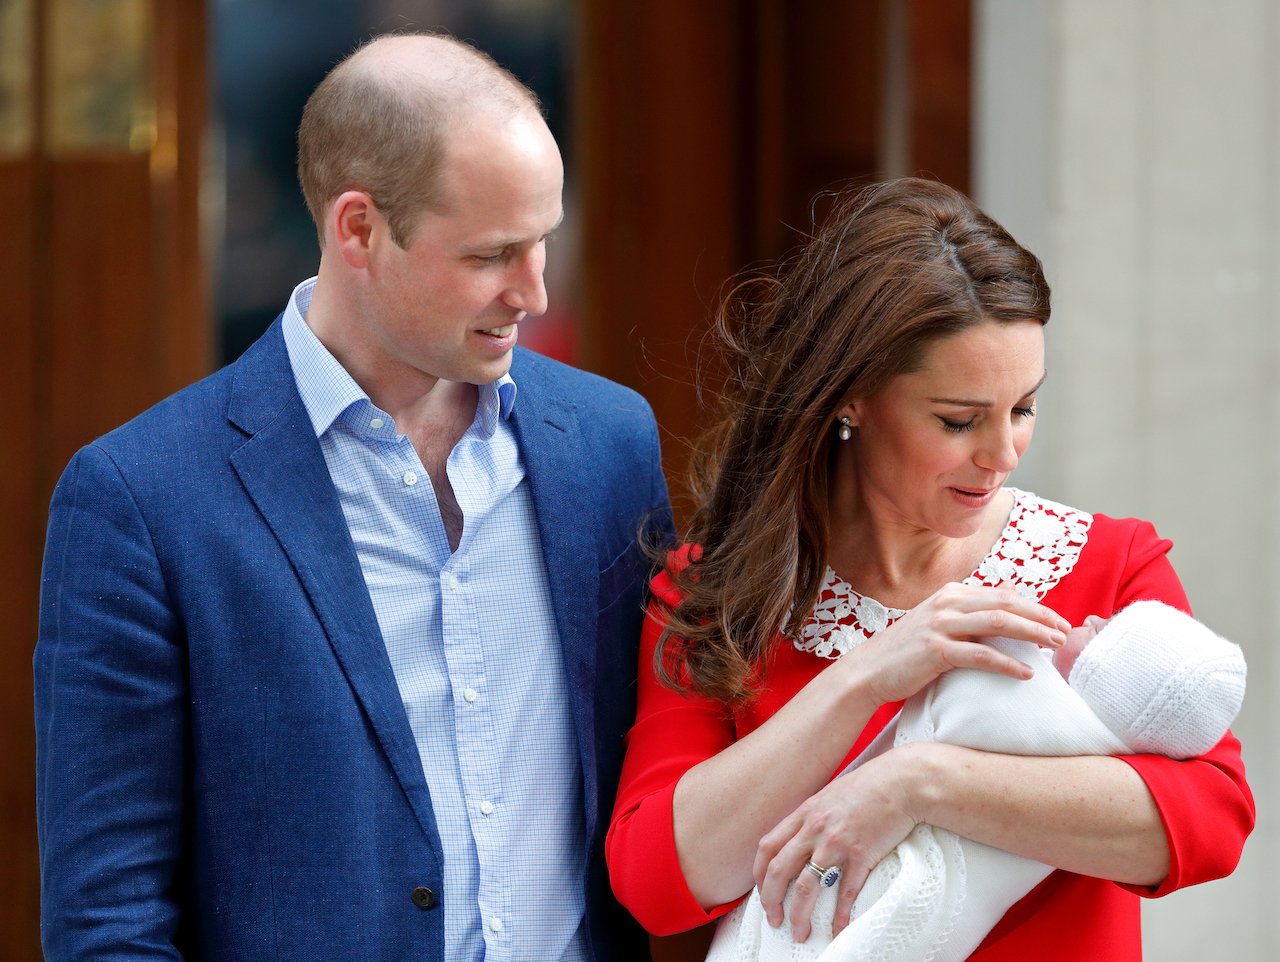 Prince William and Kate Middleton depart St Mary's Hospital with newborn Prince Louis on April 23, 2018, in London, England.